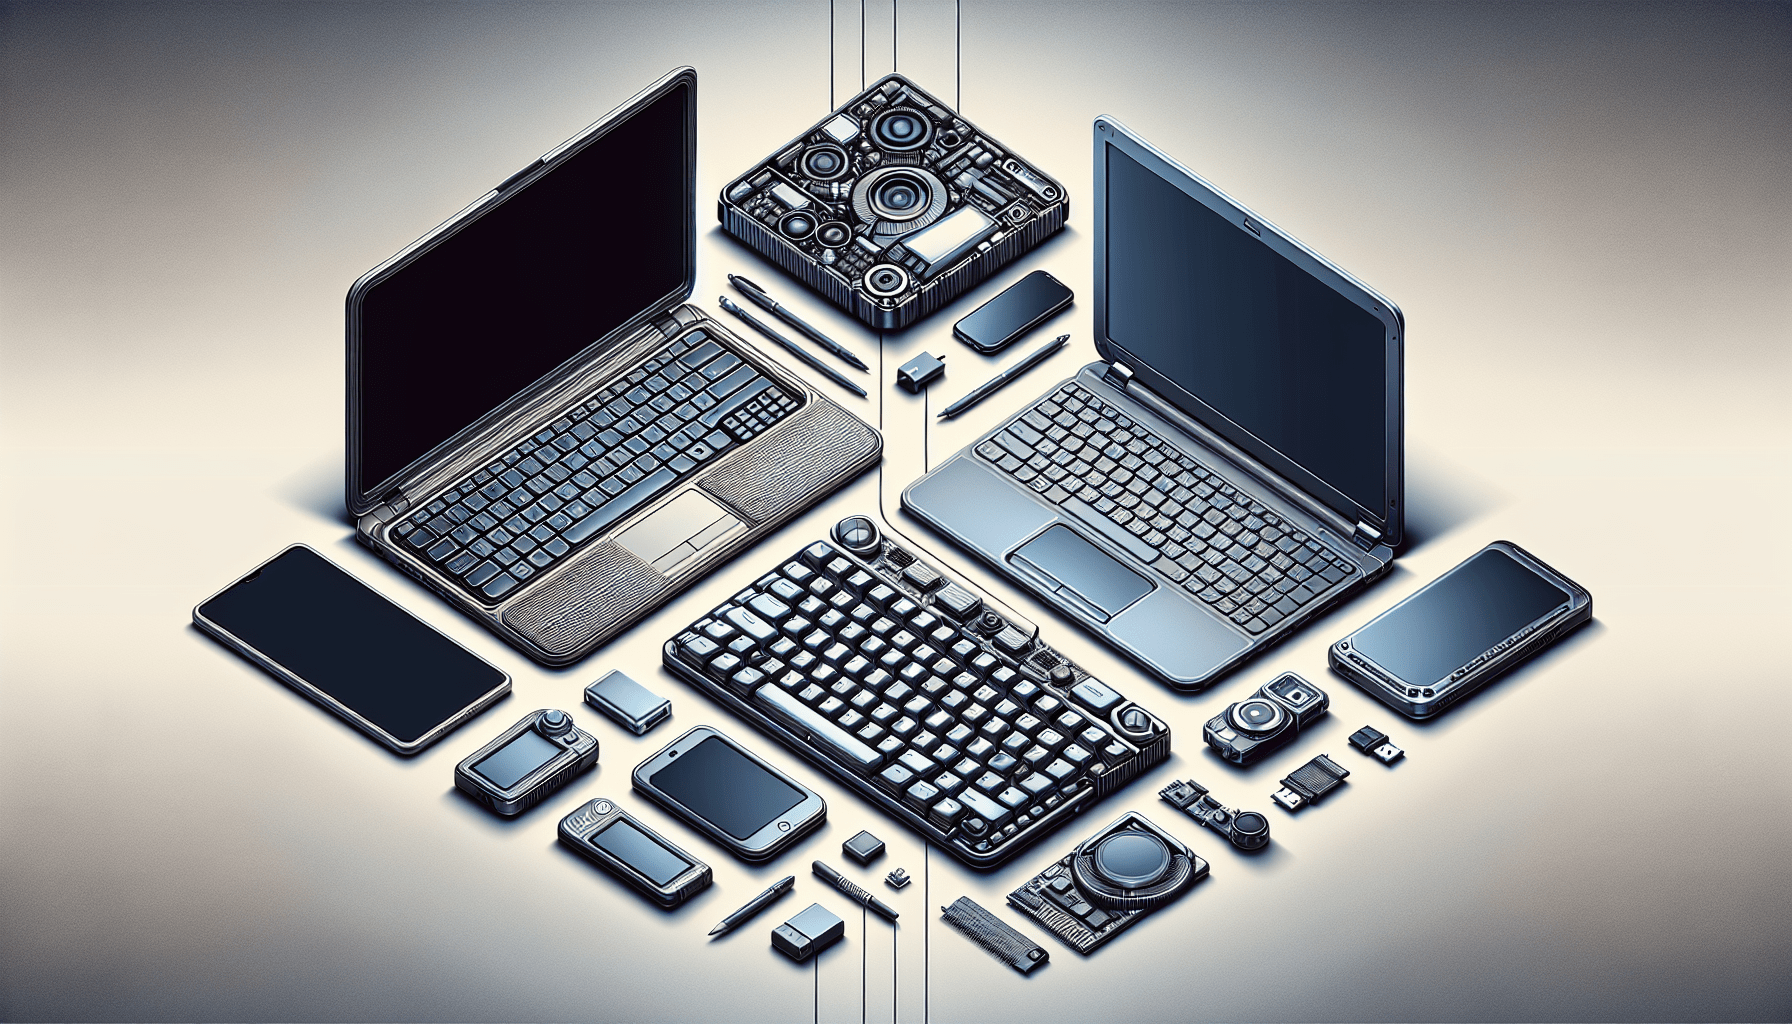 What Is The Difference Between A Laptop And A Mini Computer?